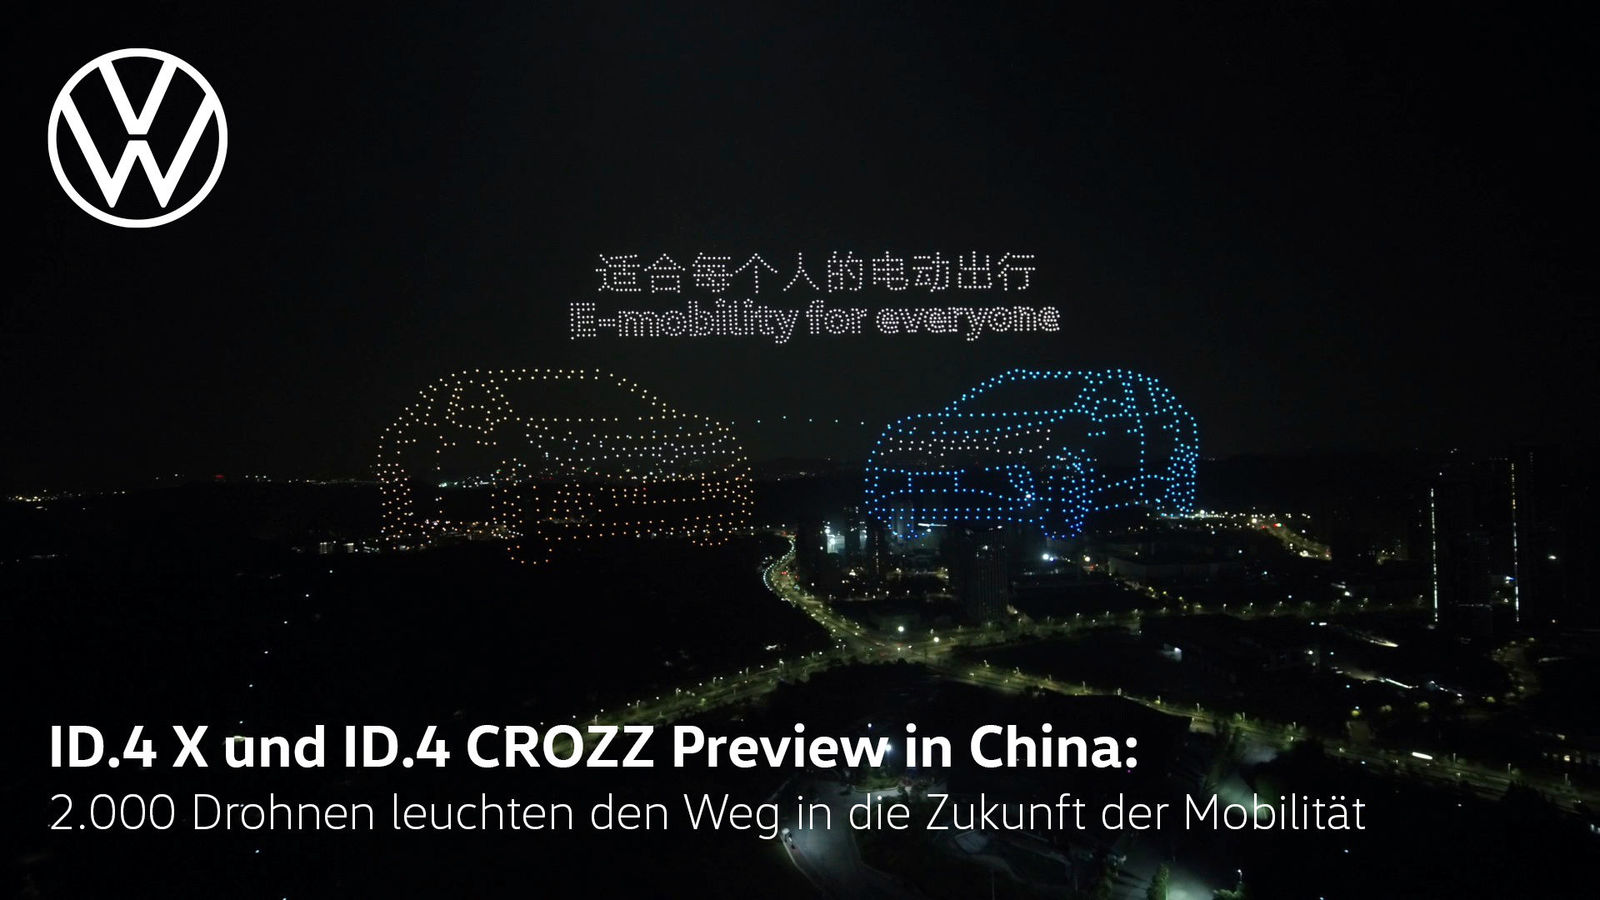 ID.4 X und ID.4 CROZZ Preview in China